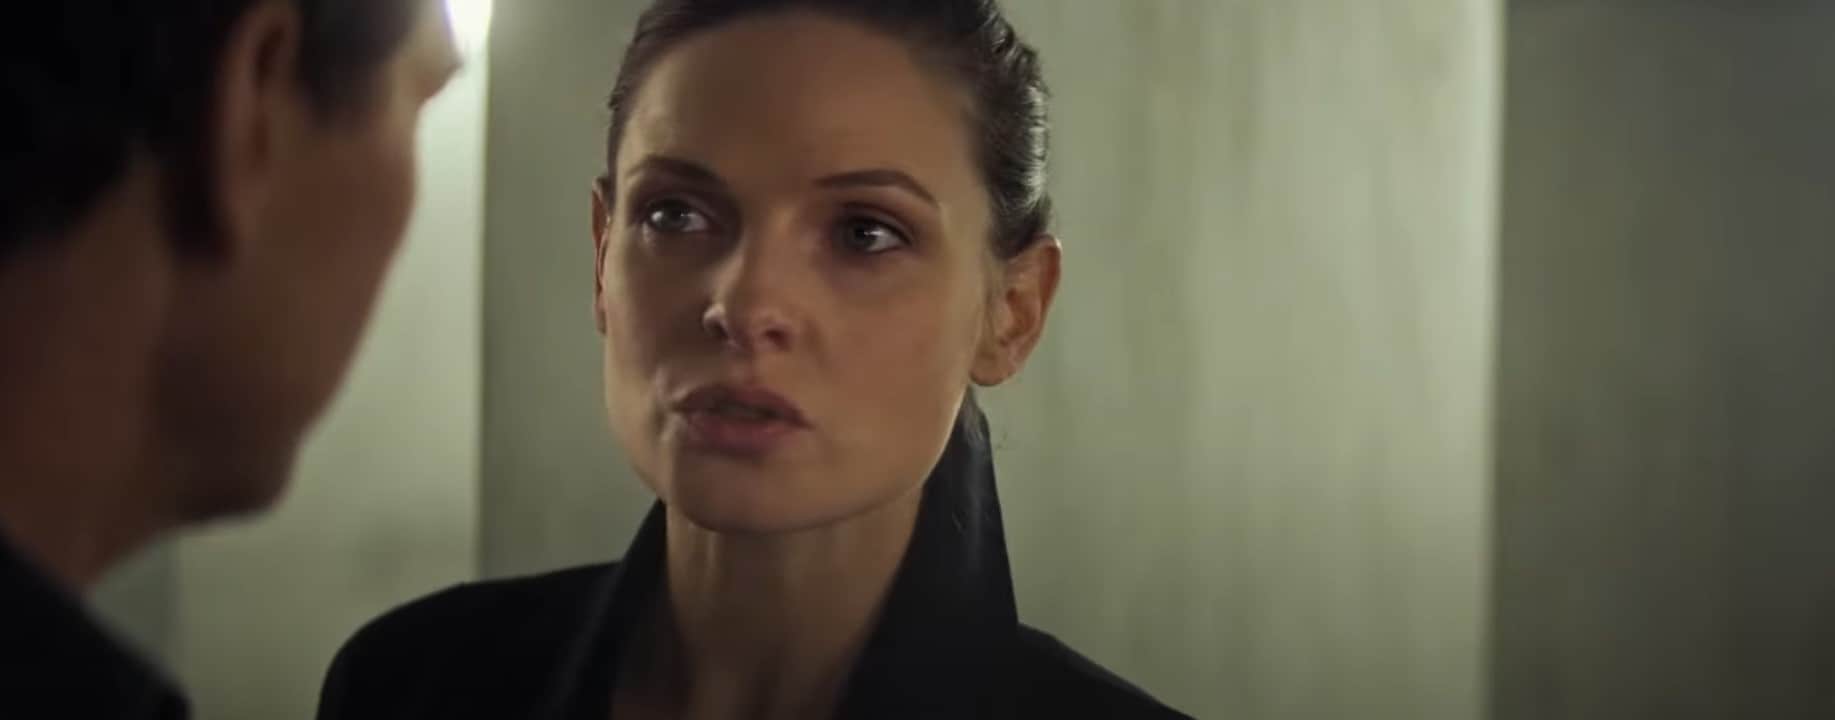 Why Did Rebecca Ferguson Leave Mission Impossible?